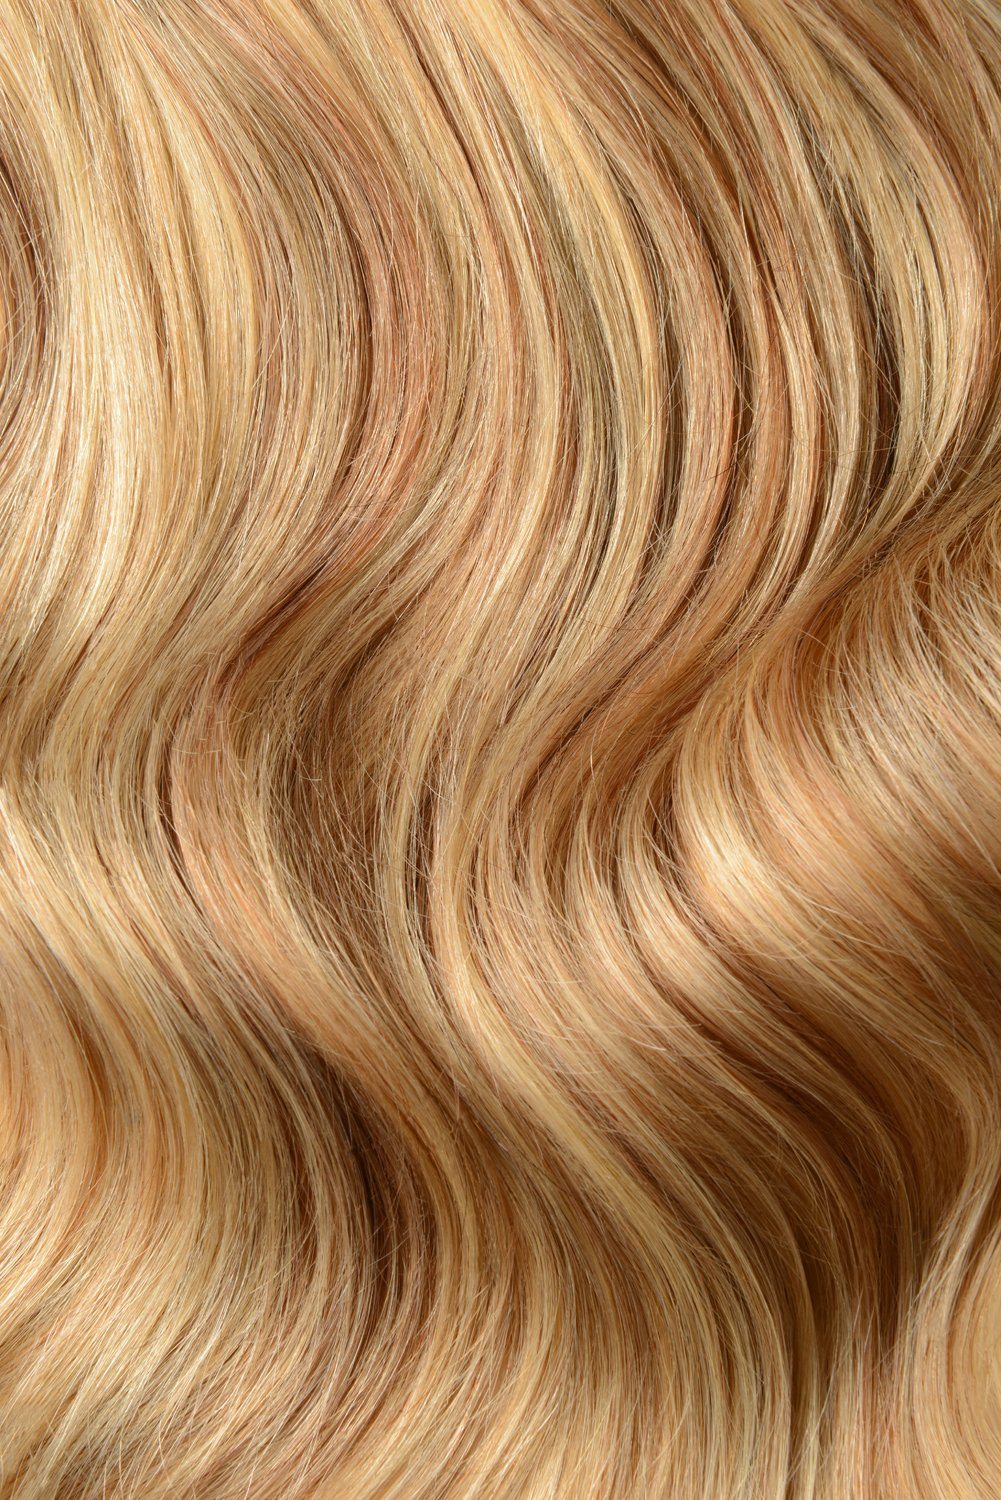 Double Wefted Full Head Remy Clip in Human Hair Extensions - Medium Golden Brown/Golden Blonde Mix (#10/16) Double wefted full head cliphair 